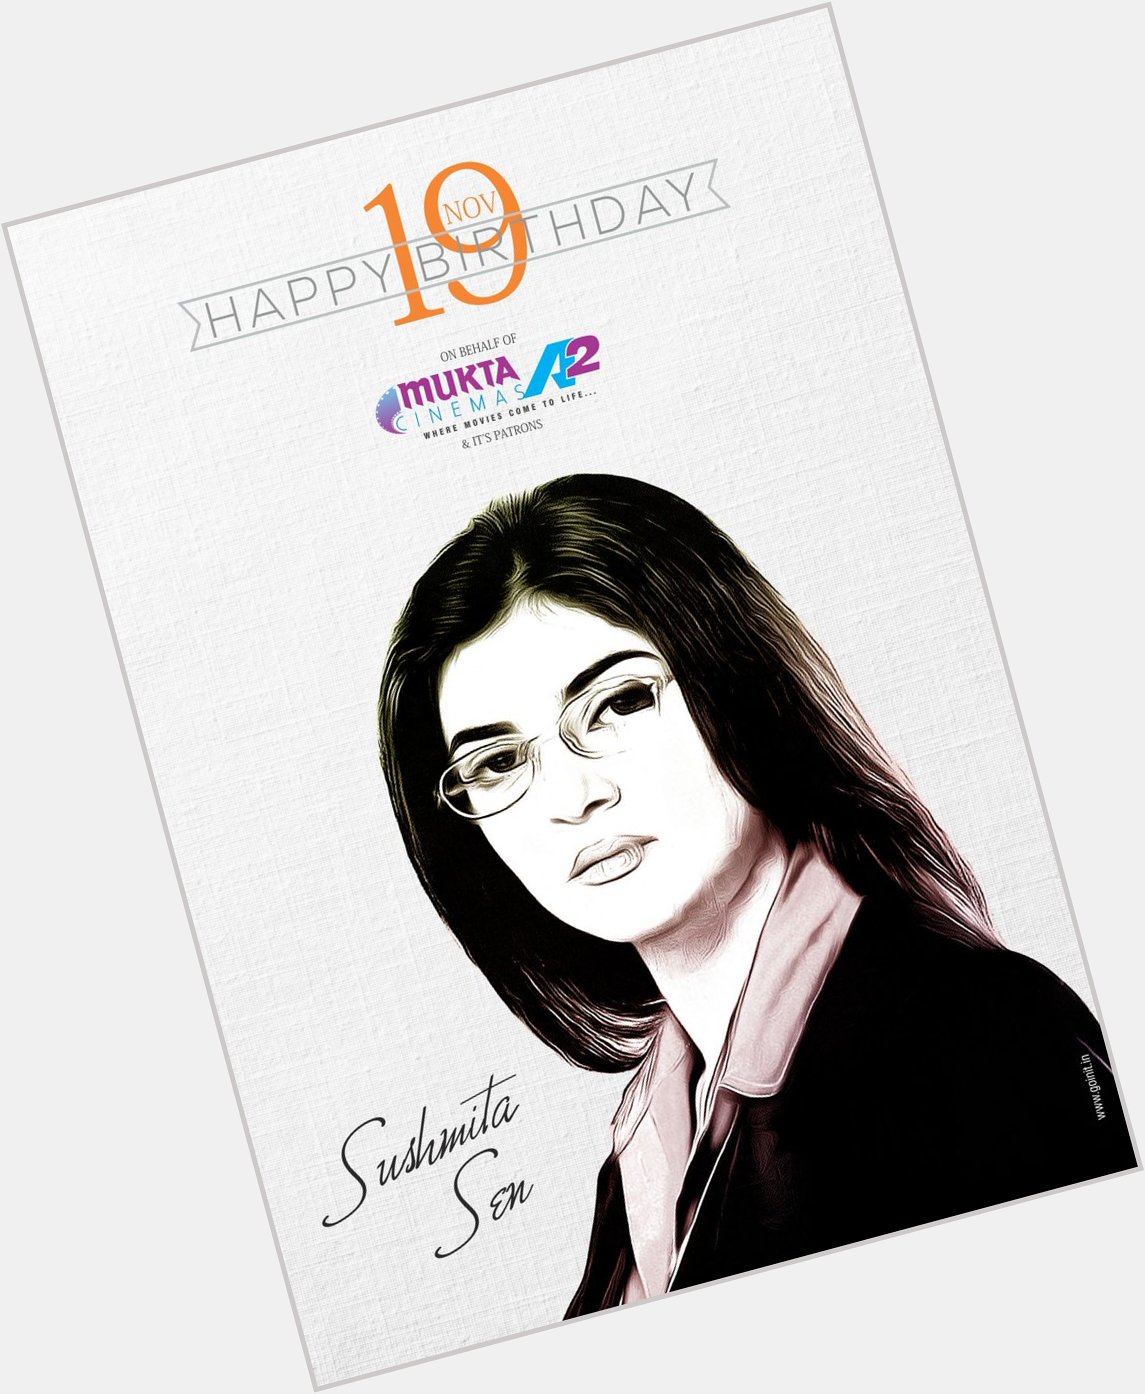 Mukta A2 Cinemas would like to wish Sushmita Sen a very happy birthday. May hapiness always find you. 